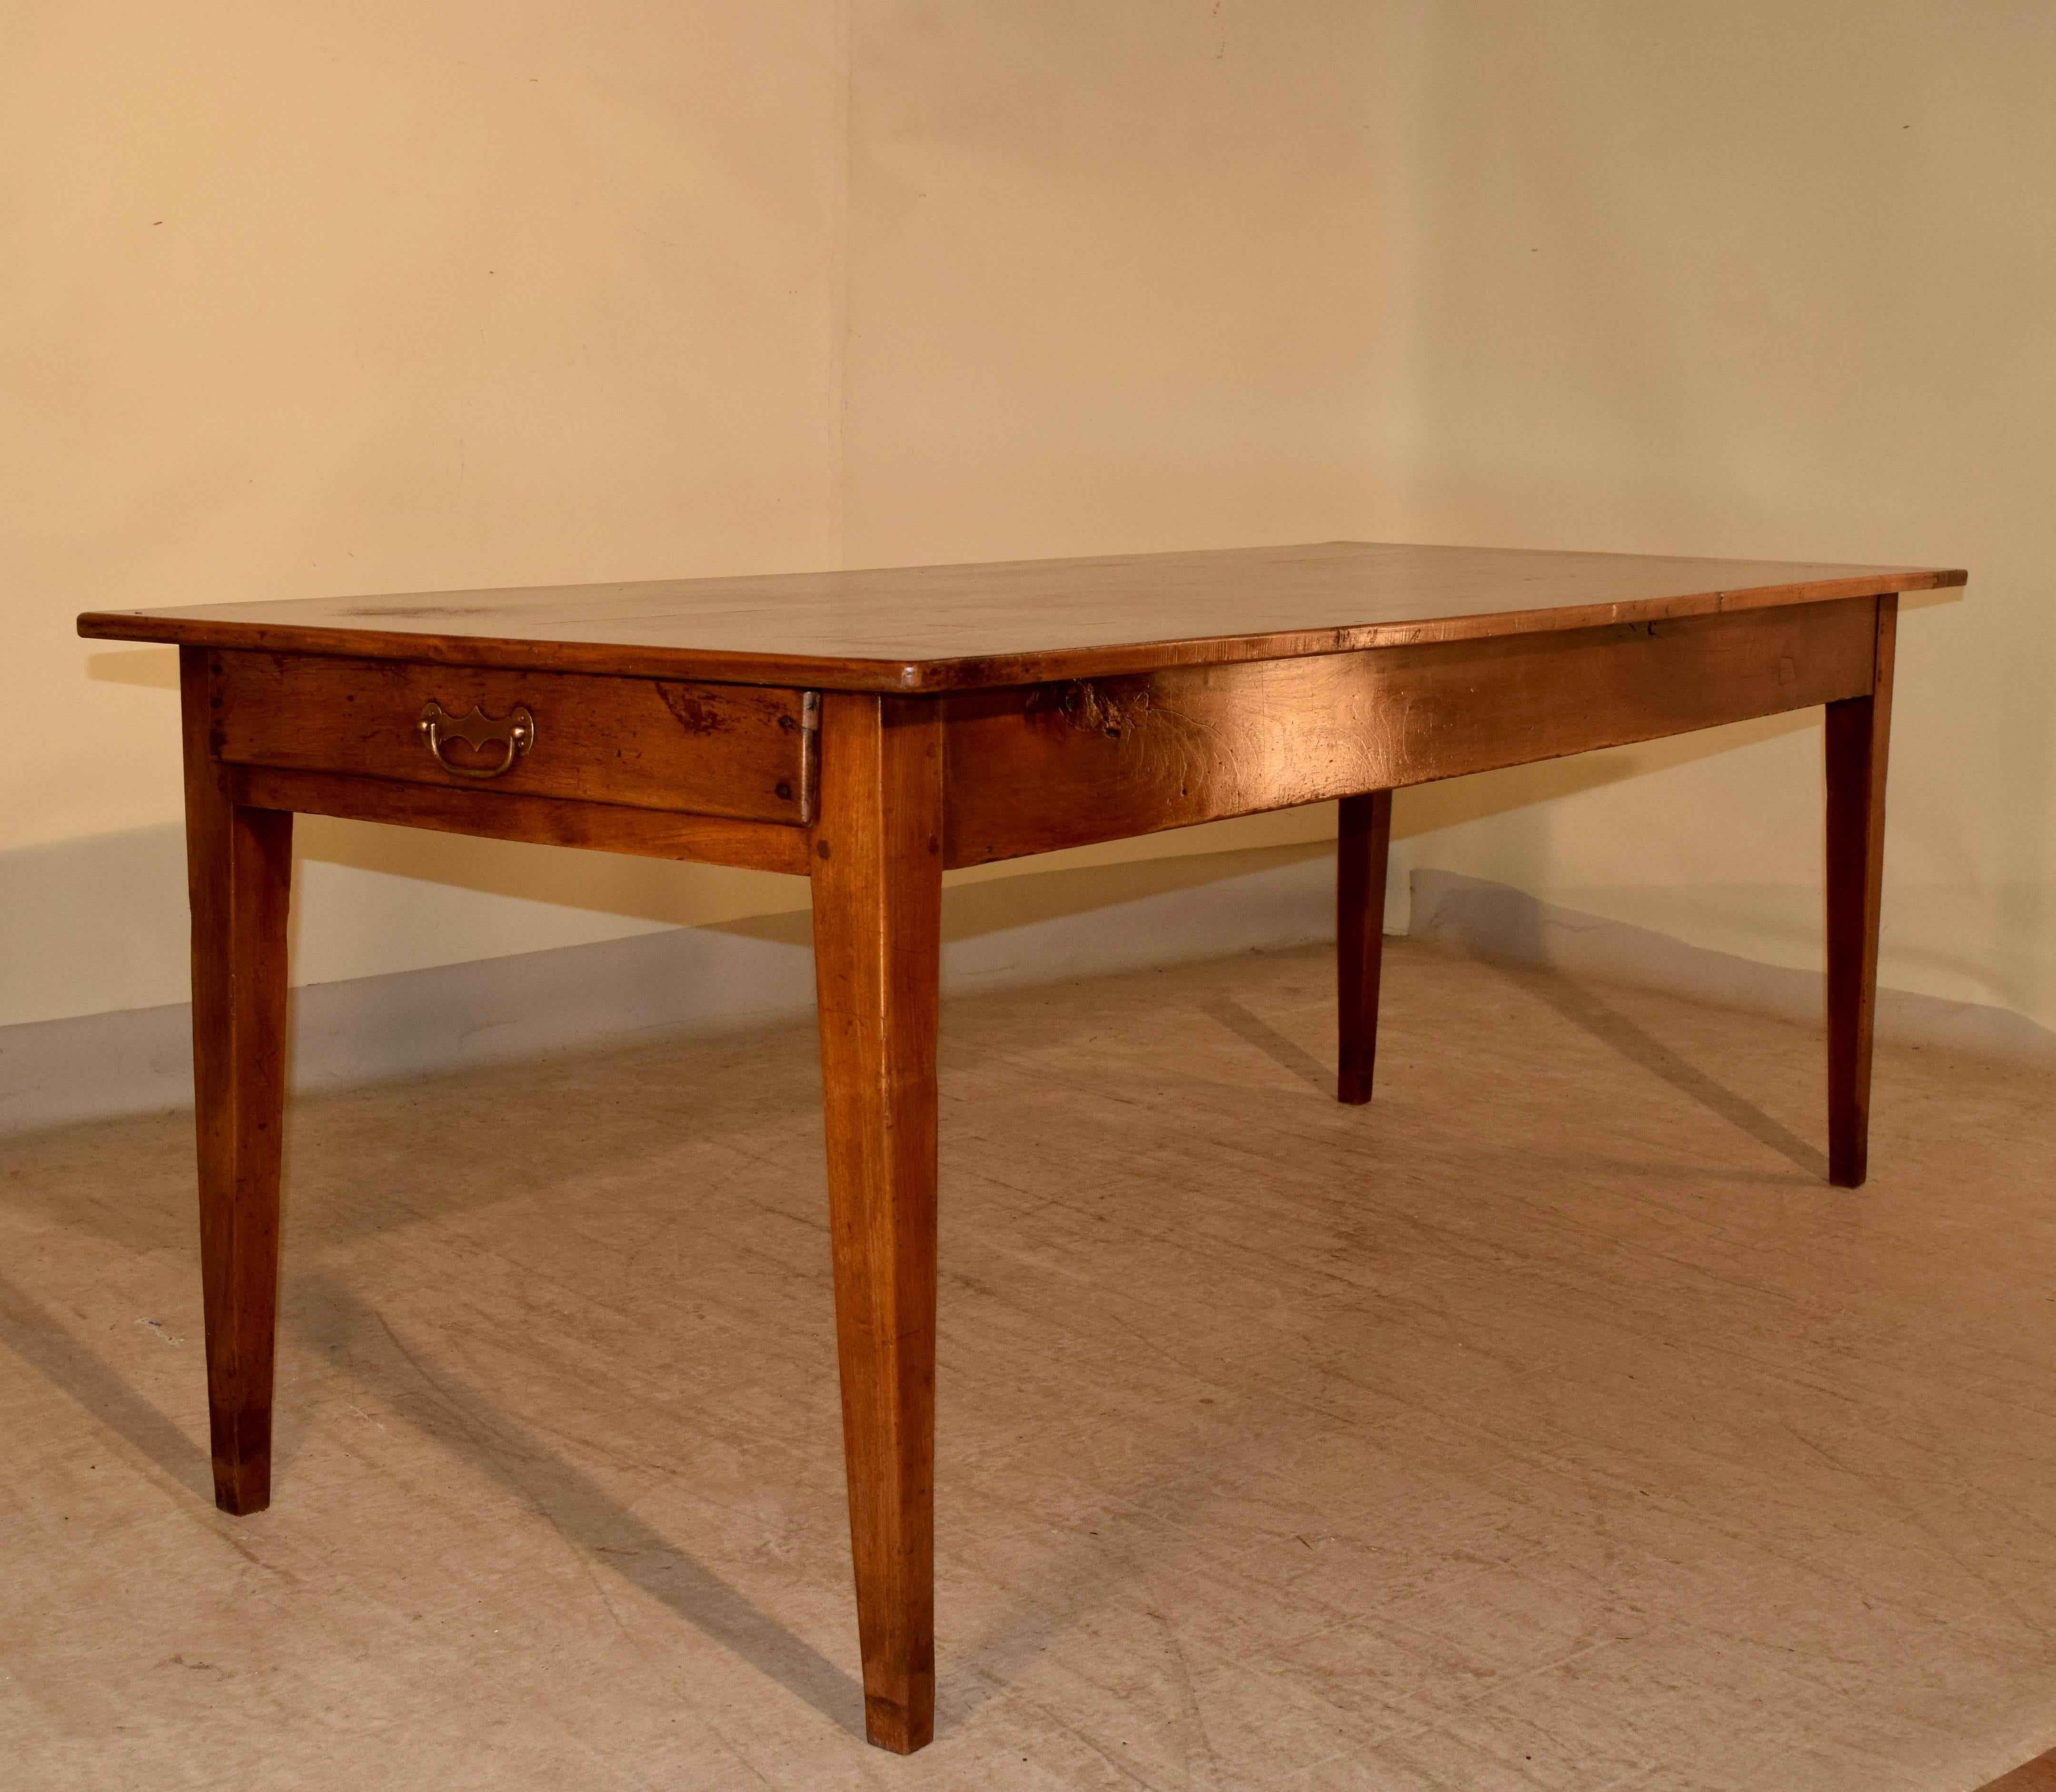 19th century French farm table made from cherry with a banded plank top, simple apron containing a drawer on one end and a bread board on the other end. The legs are tapered and the apron measures 24.13